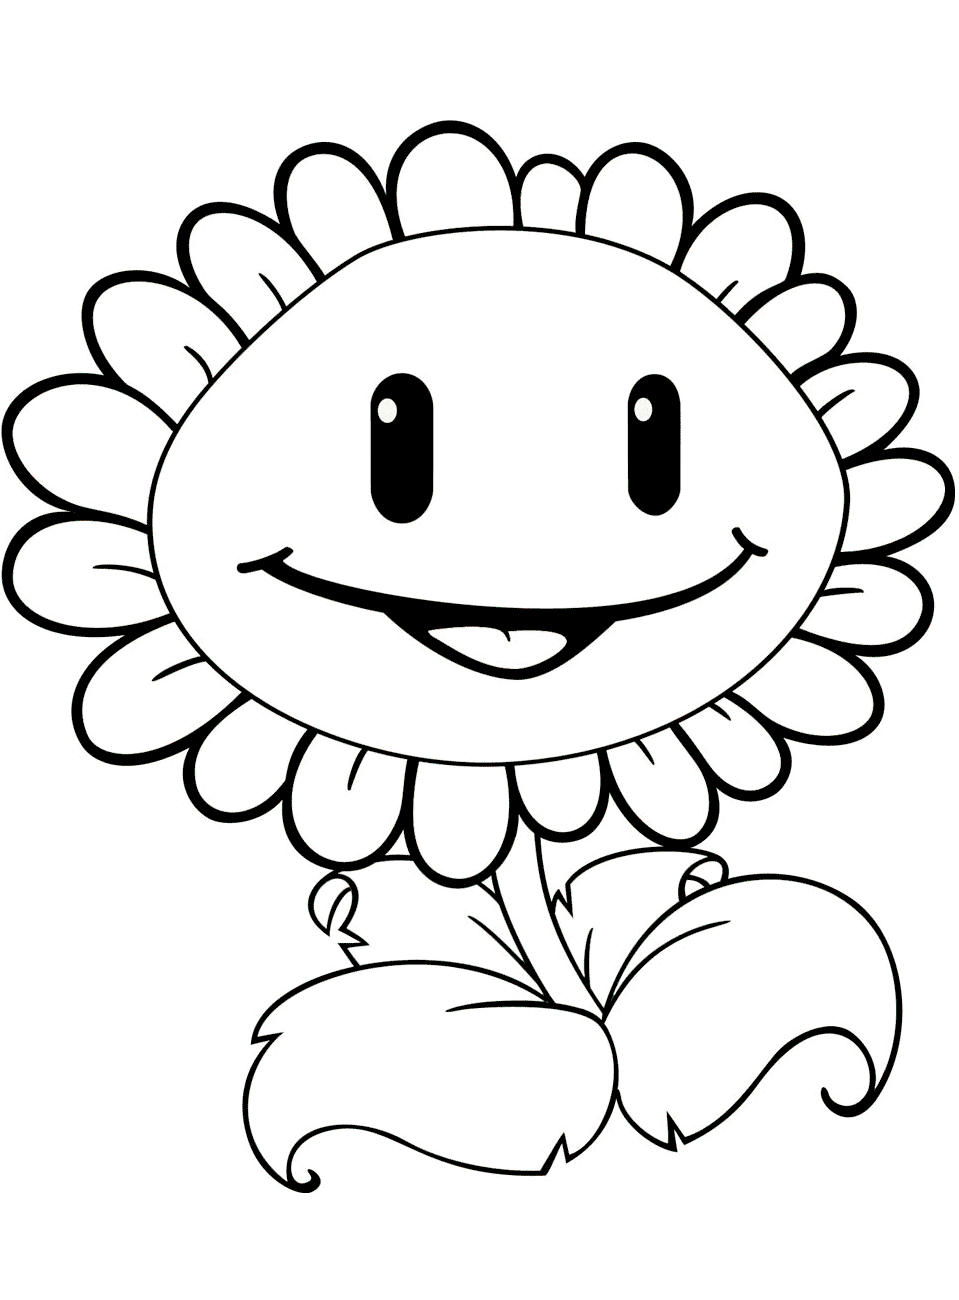 Sunflower In Plants Vs. Zombies Coloring Page   Free Printable ...